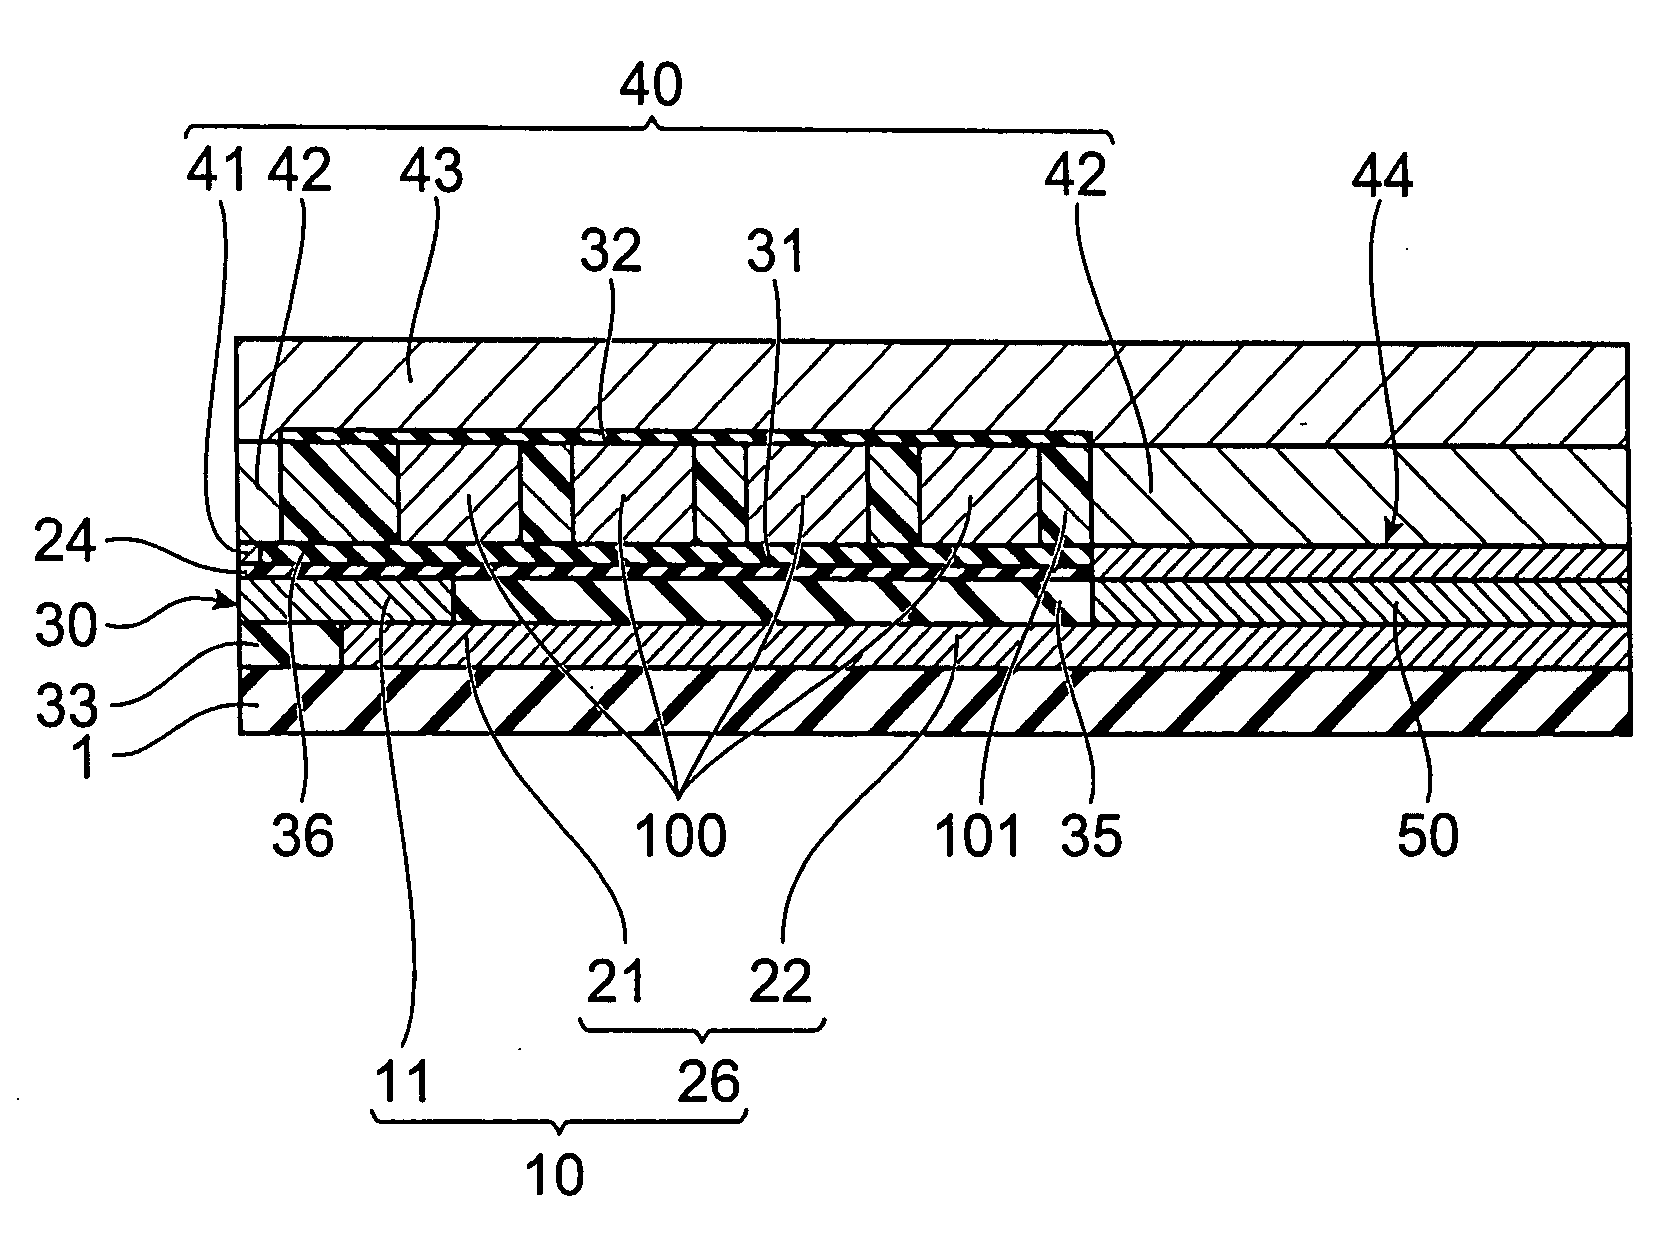 Thin-film magnetic head, method of manufacturing the same, head gimbal assembly and hard disk drive